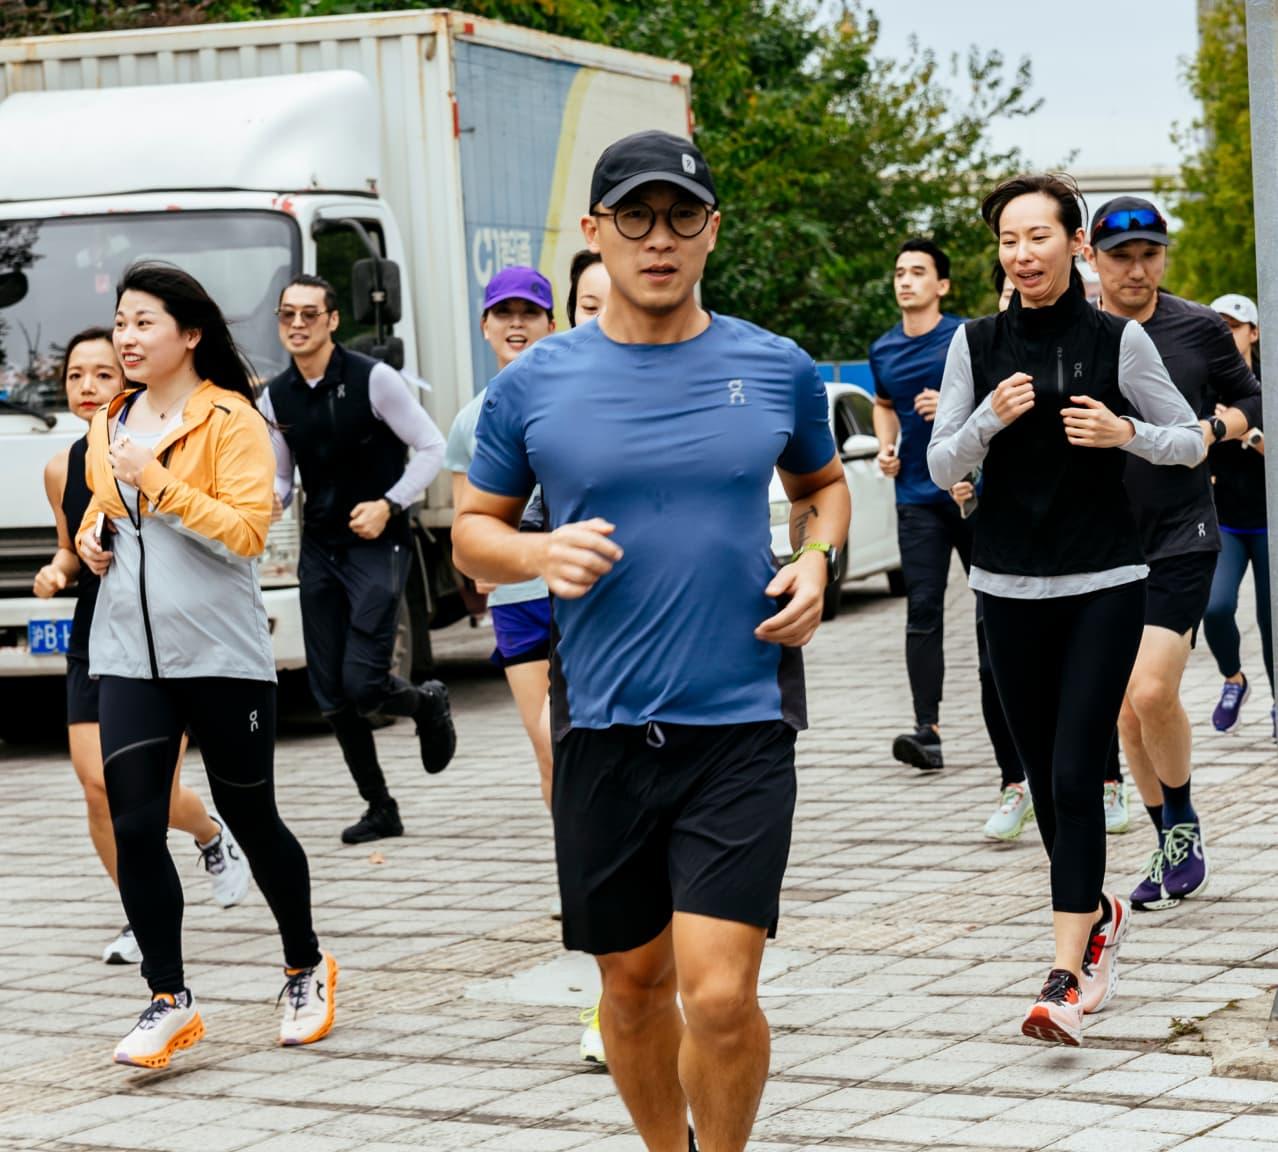 Man in a blue T-Shirt running with a group of runners behind him